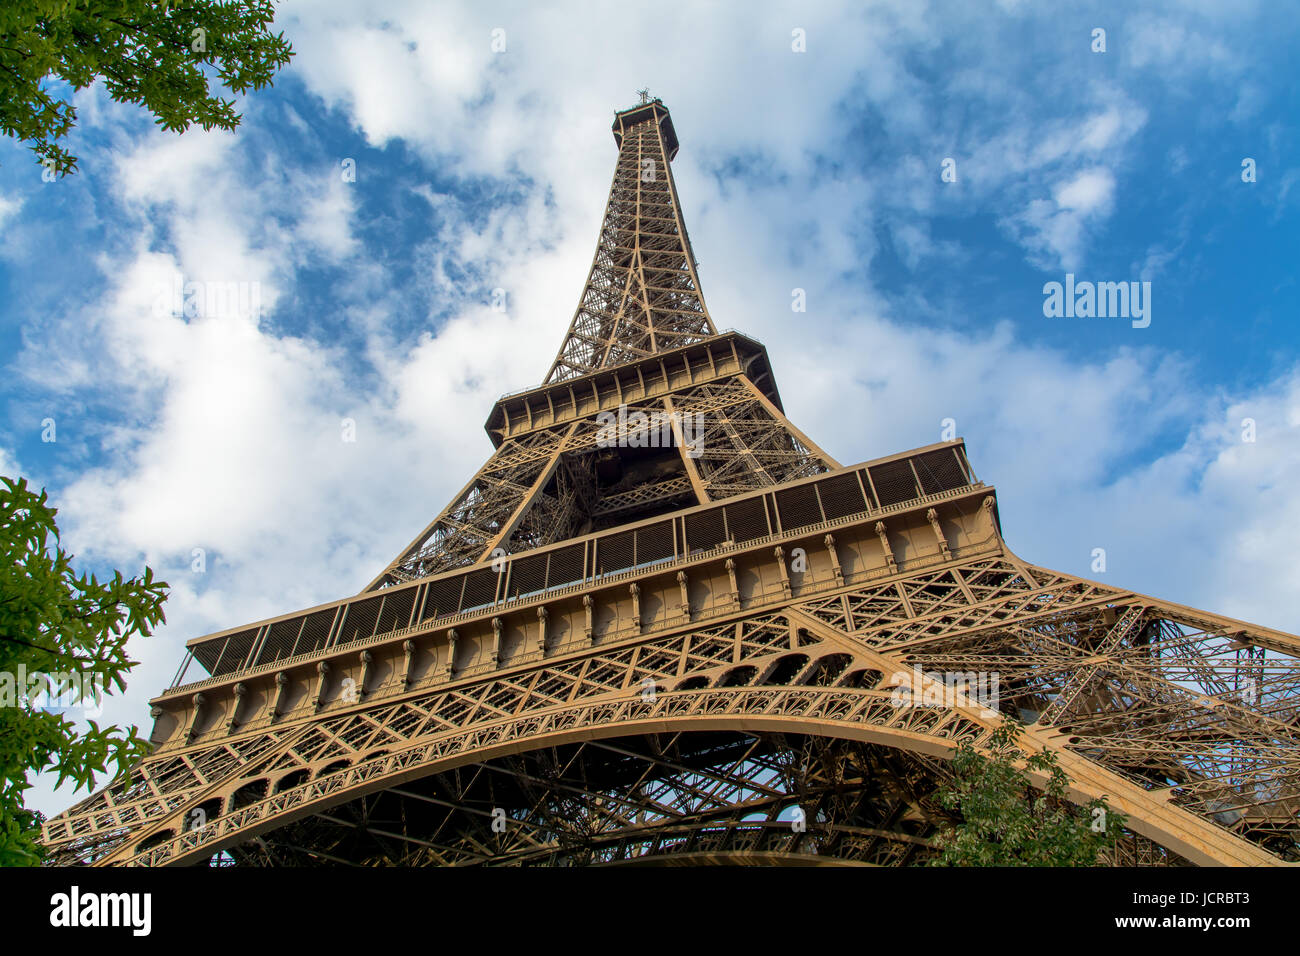 Low angle view of Eiffel Tower Banque D'Images